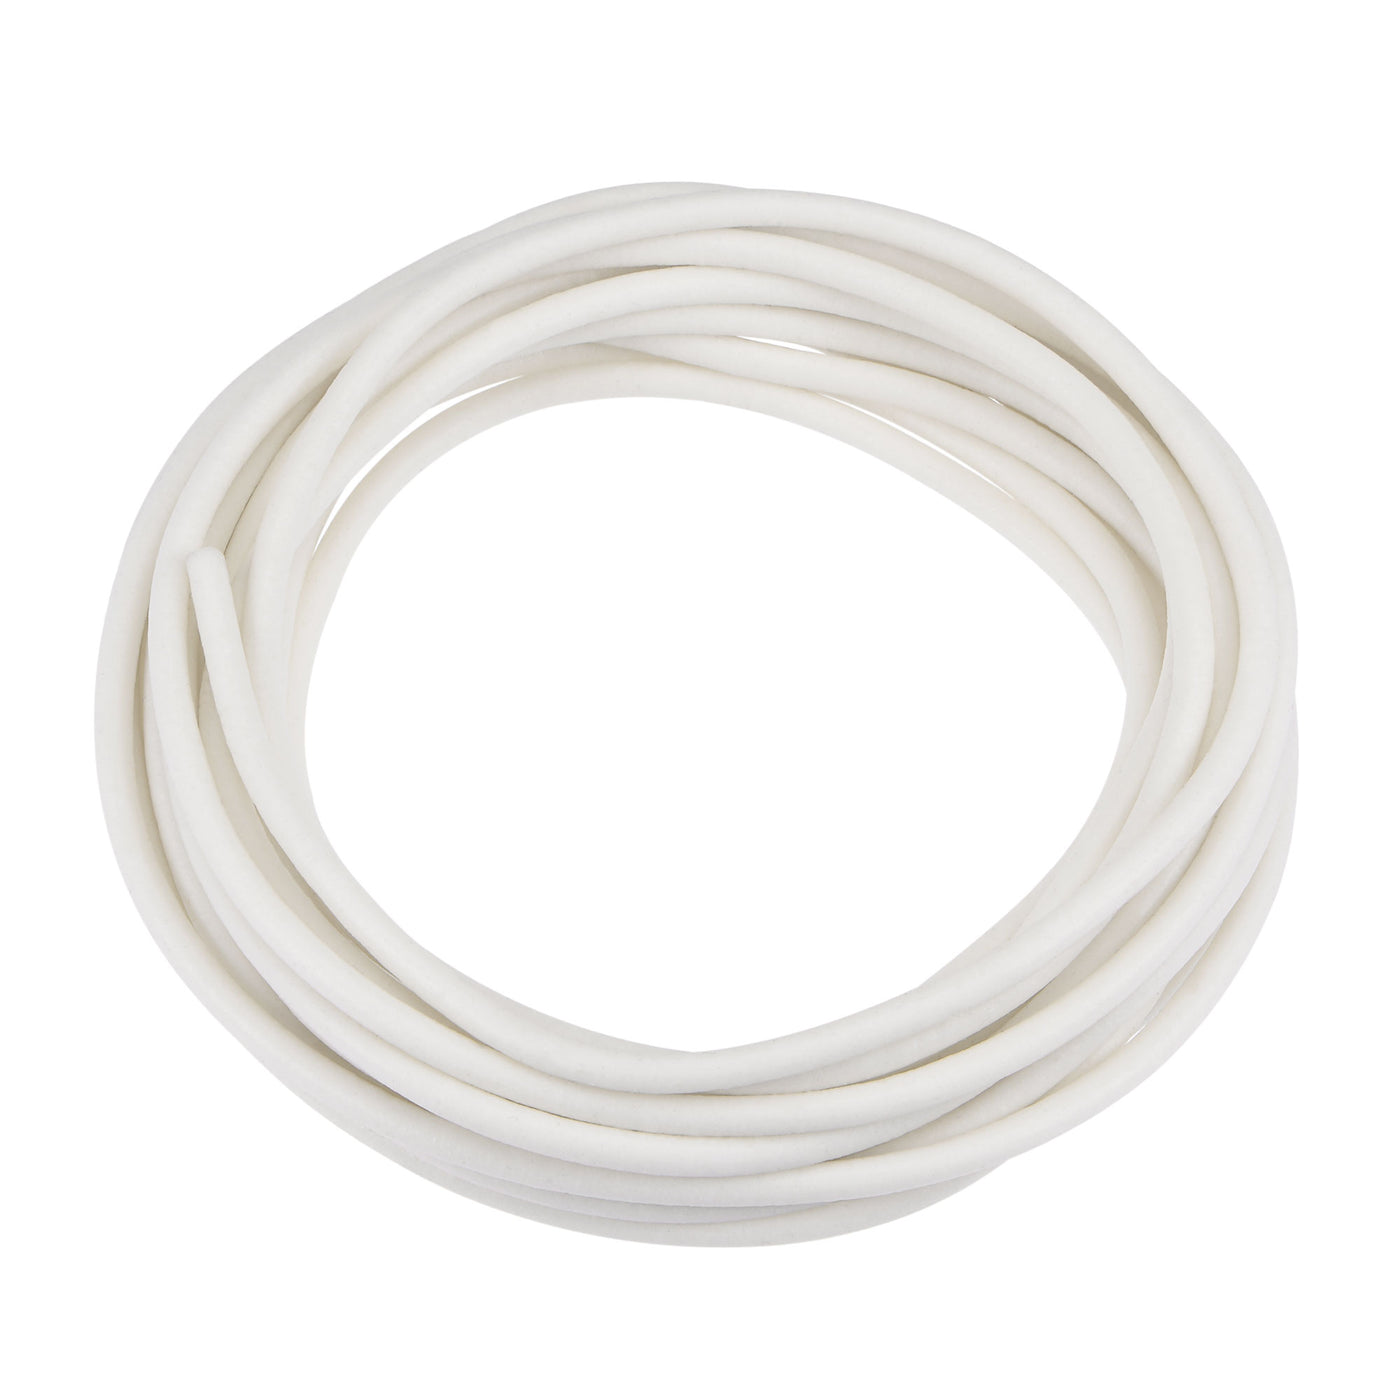 uxcell Uxcell 1/8"(3mm) Soft Silicone Bending Insert Tube for Rigid Tubing 13ft White